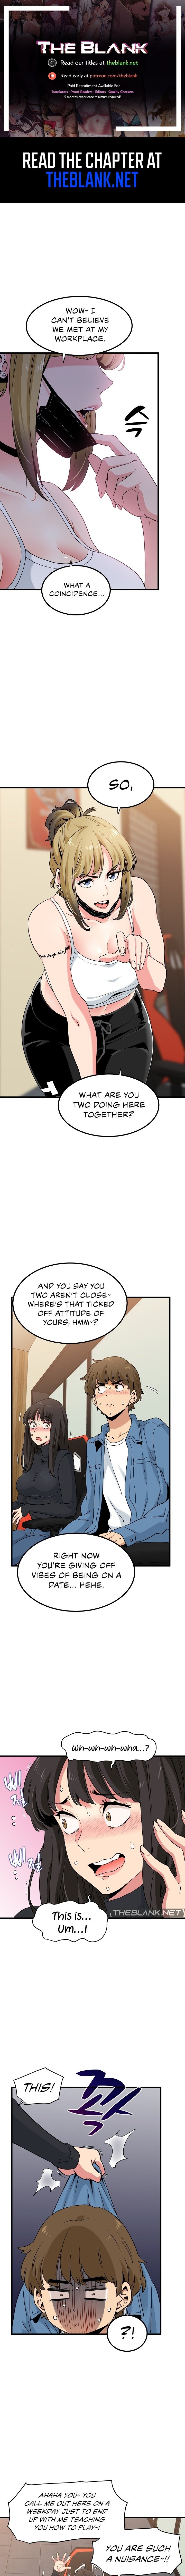 a-turning-point-chap-23-0